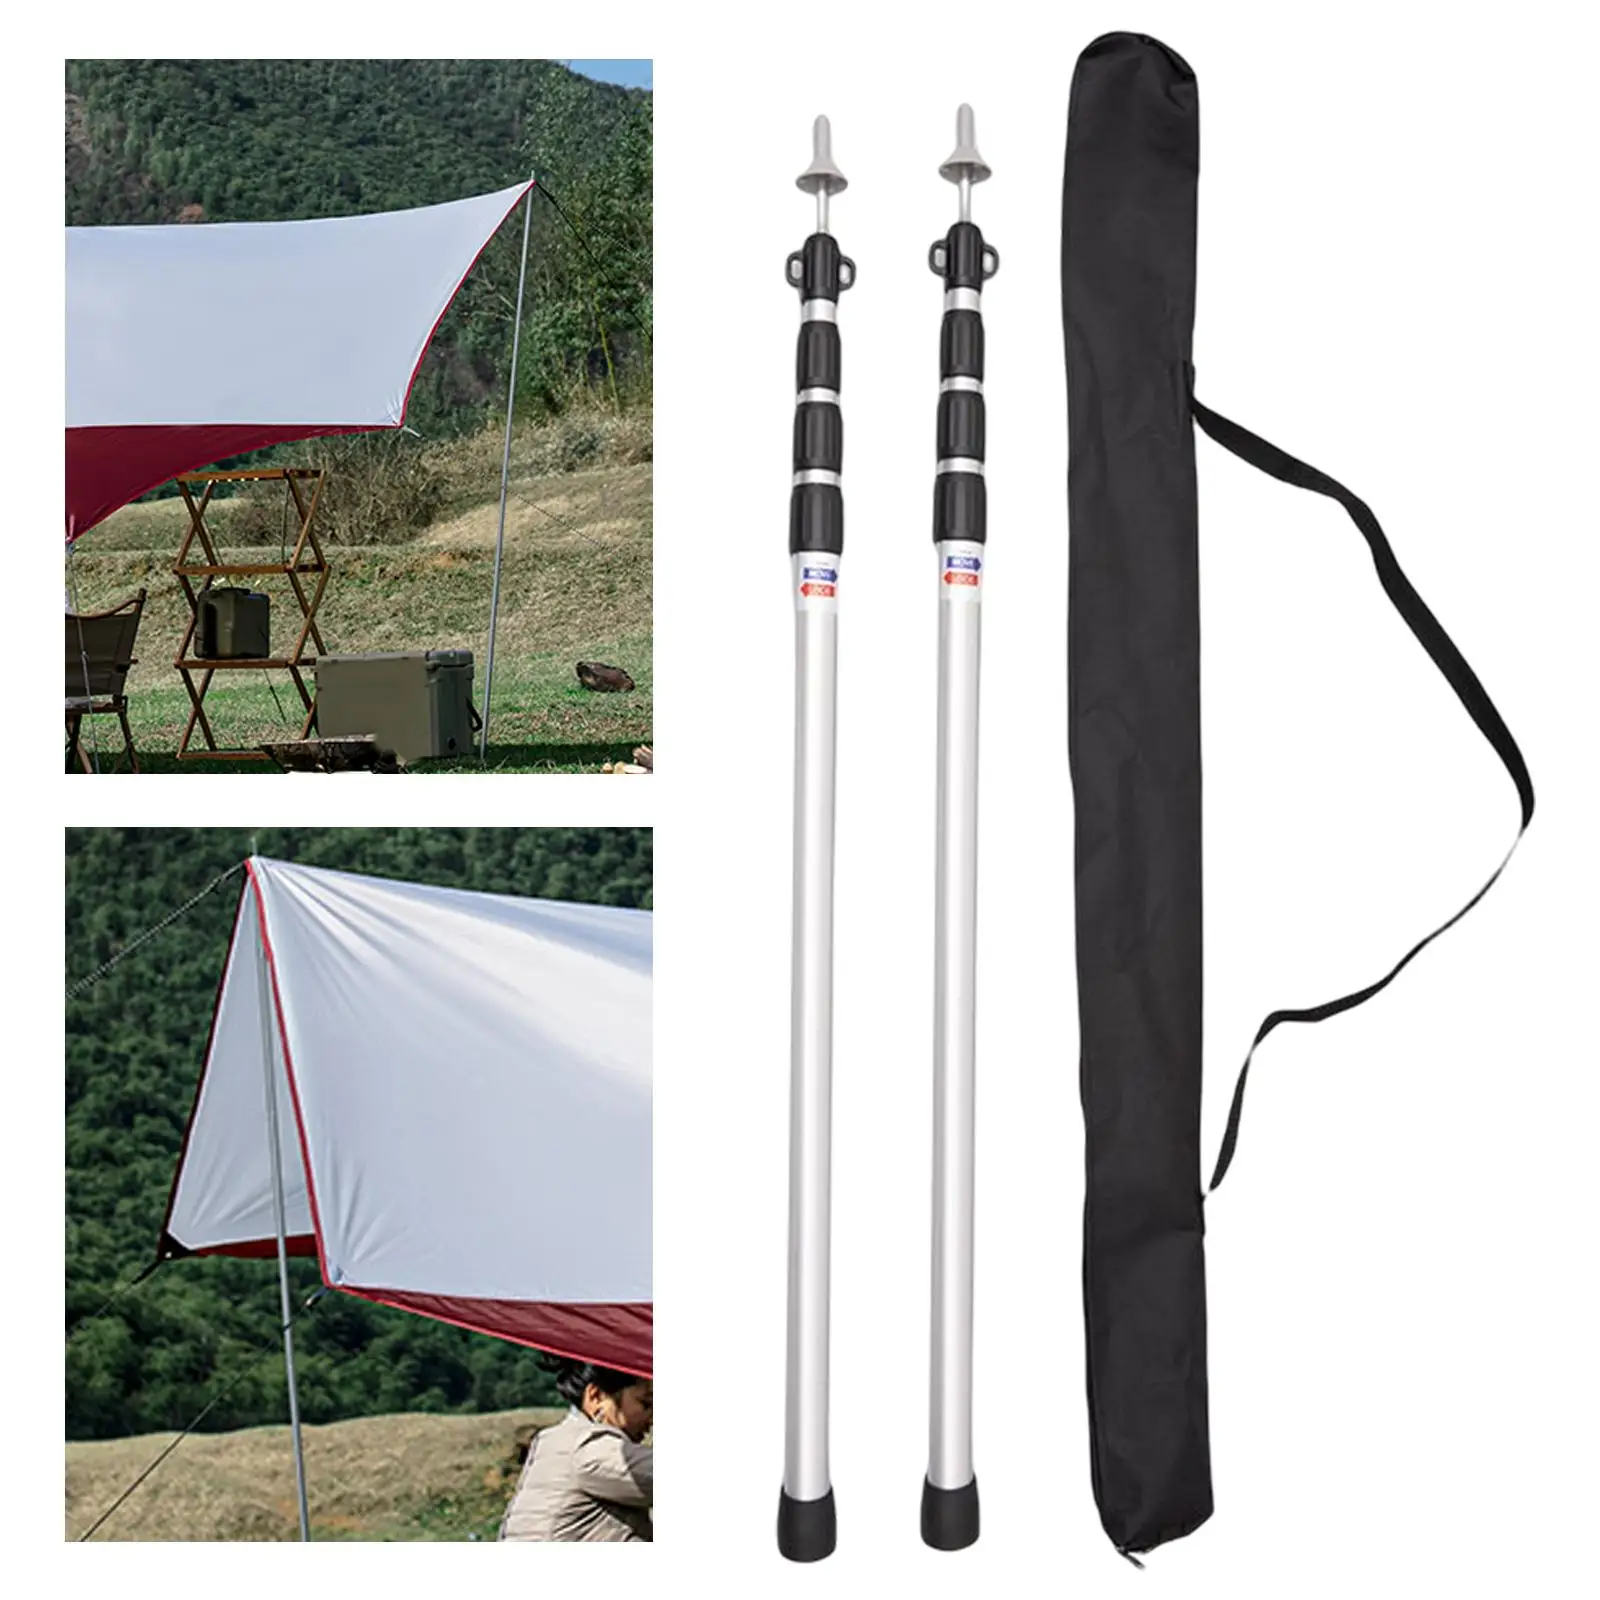 Thicken Aluminum Alloy Tent Pole Adjustable Tent Support Rods Beach Shelter Tarp Awning Pole Replacement Poles for Camping Tent